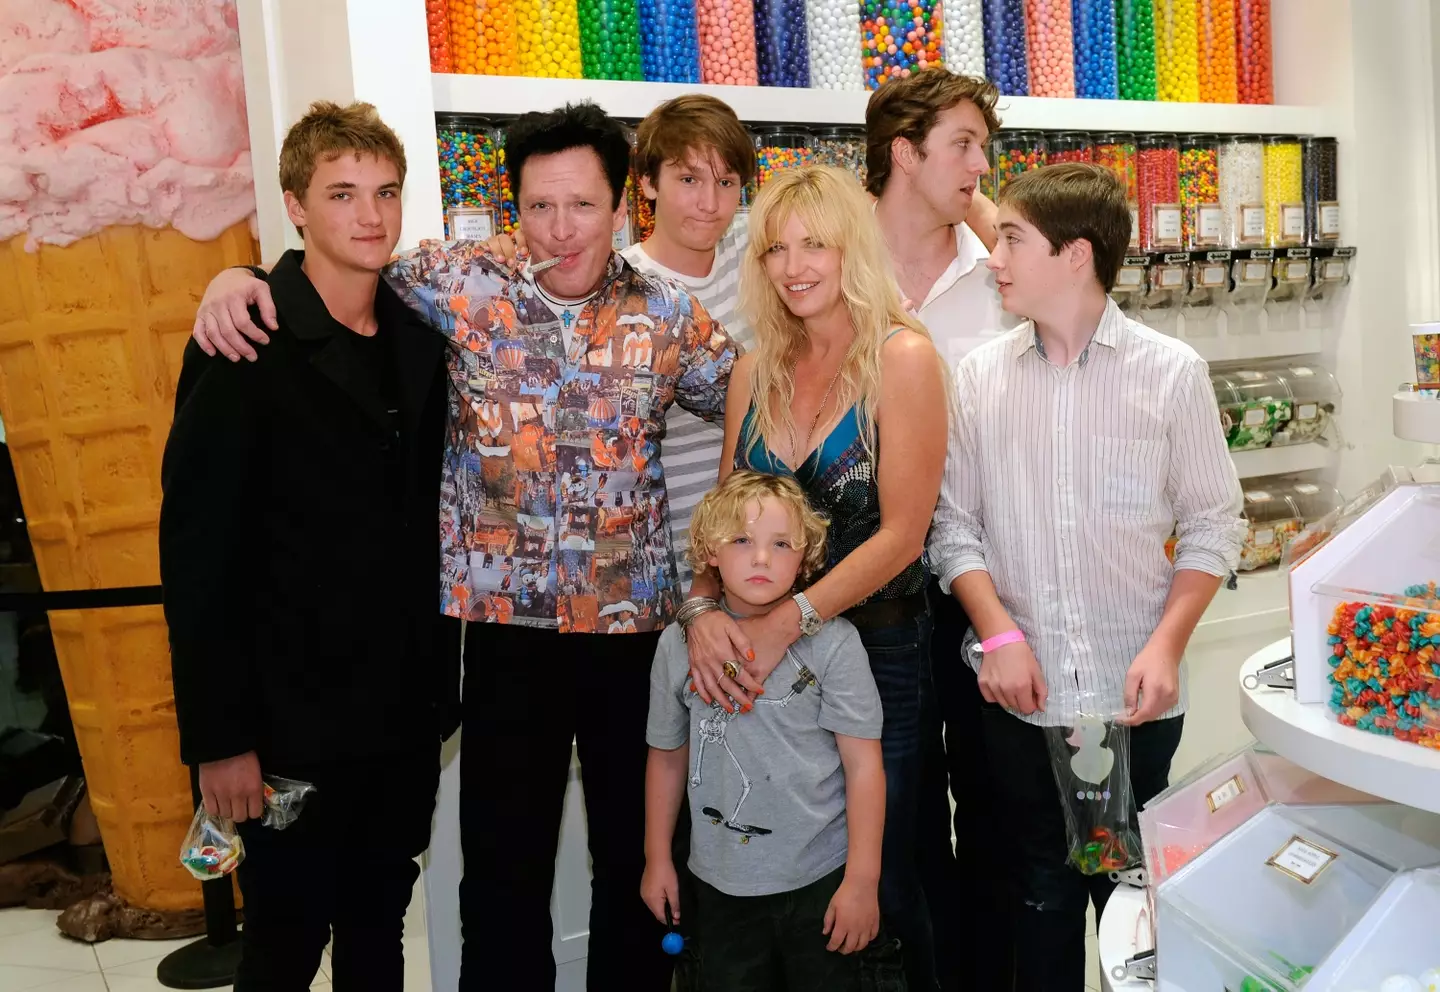 Michael Madsen with his family; Hudson is on the far left.